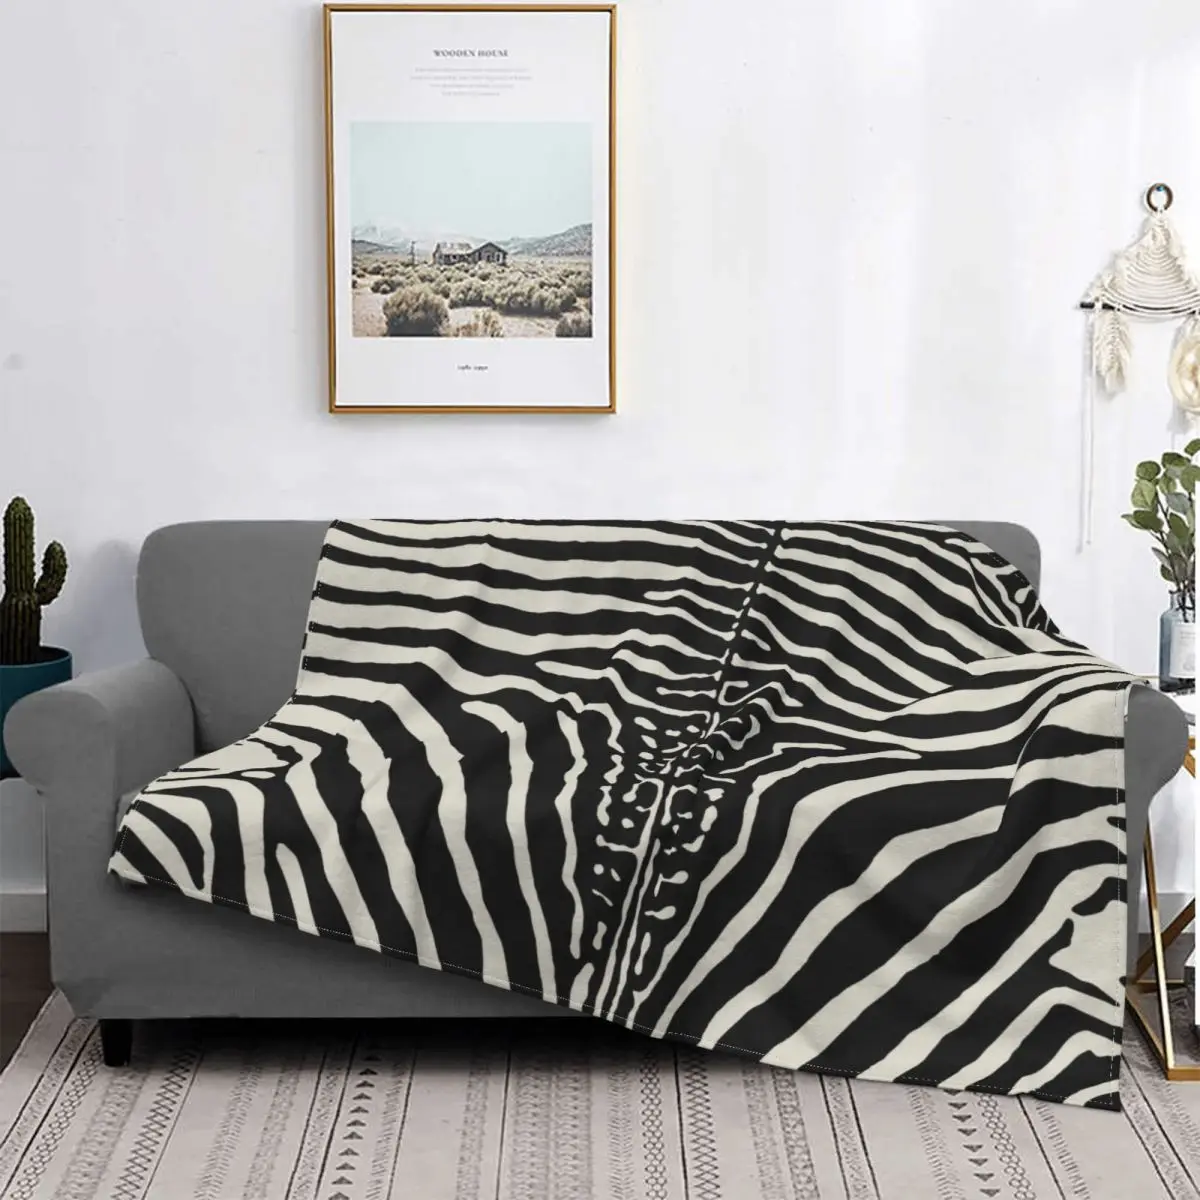 

Zebra Stripes Print Skin Hide Texture Blankets Flannel Printed Skin Animal Portable Soft Throw Blankets for Home Couch Bedspread